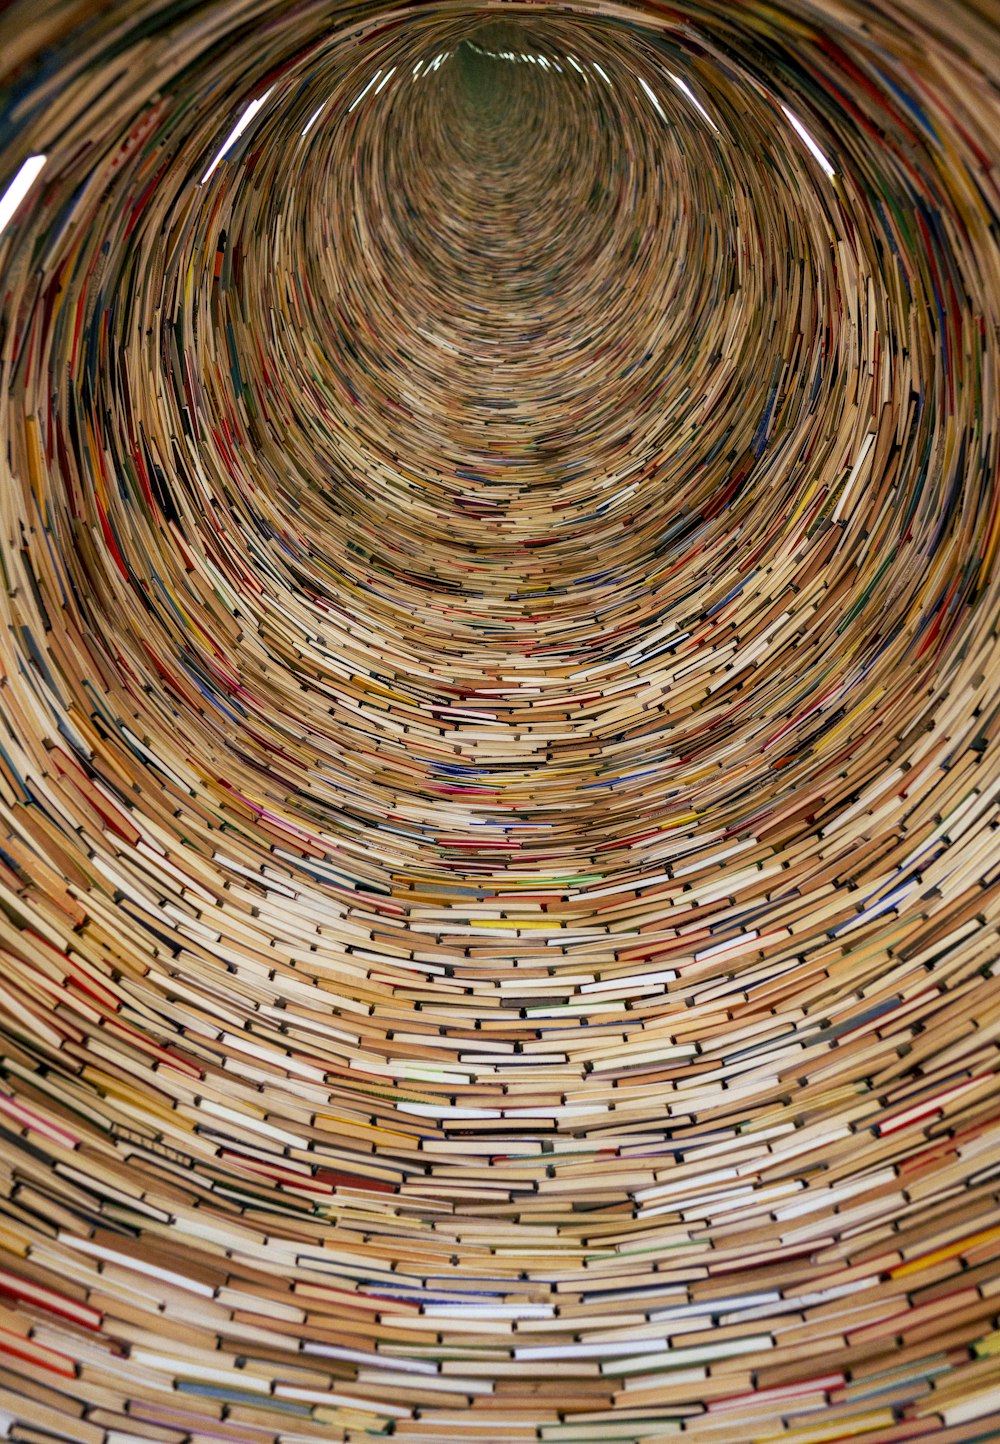 a very large circular object made out of books